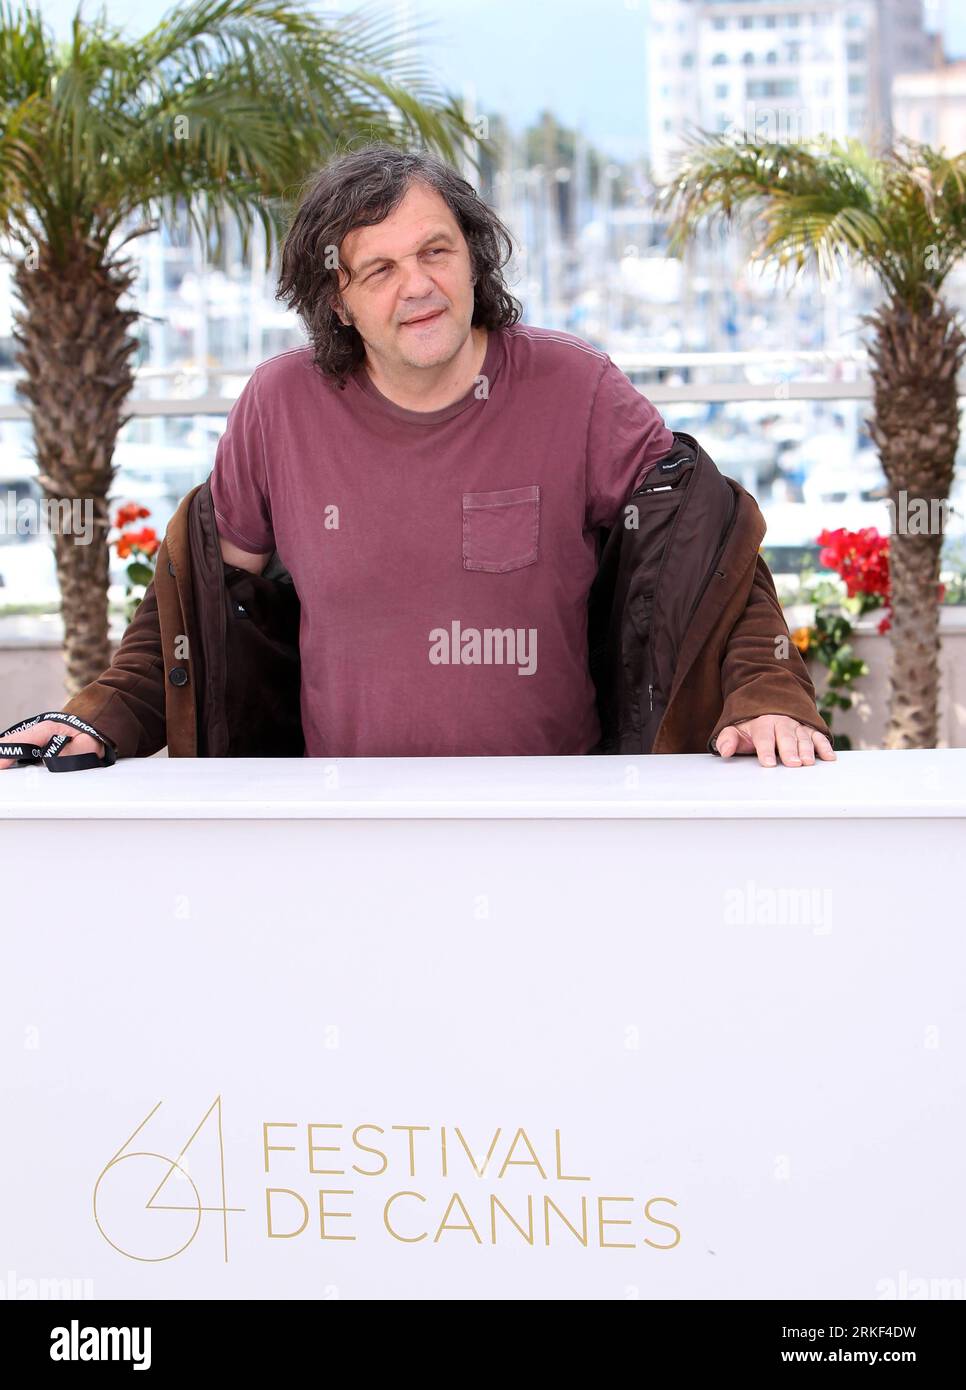 Bildnummer: 55341631  Datum: 12.05.2011  Copyright: imago/Xinhua (110512)-- CANNES, May 12, 2011 (Xinhua) -- Serbian director and President of the jury Emir Kusturica poses during the photocall of the Un Certain Regard jury of the 64th Cannes Film Festival in Cannes, France, on May 12, 2011. (Xinhua/Gao Jing)(zf) FRANCE-CANNES-FILM FESTIVAL-UN CERTAIN REGARD-JURY-PHOTOCALL PUBLICATIONxNOTxINxCHN Kultur Entertainment People Film 64. Internationale Filmfestspiele Cannes Photocall kbdig xkg 2011 hoch premiumd     Bildnummer 55341631 Date 12 05 2011 Copyright Imago XINHUA  Cannes May 12 2011 XINHU Stock Photo